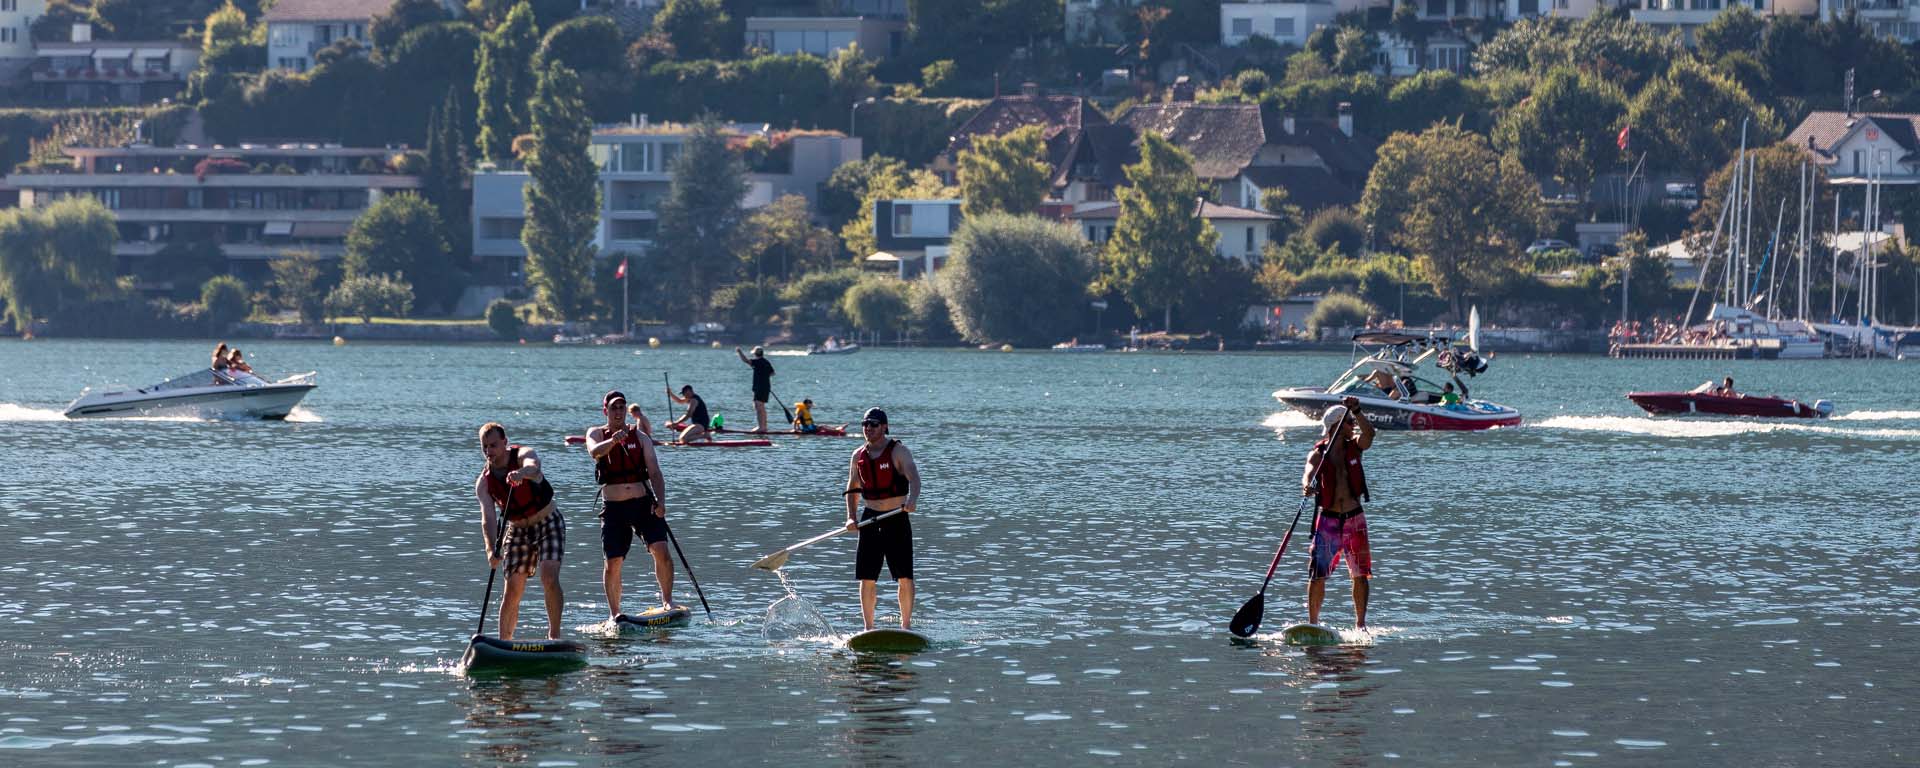 Stand-up paddle am Bielersee